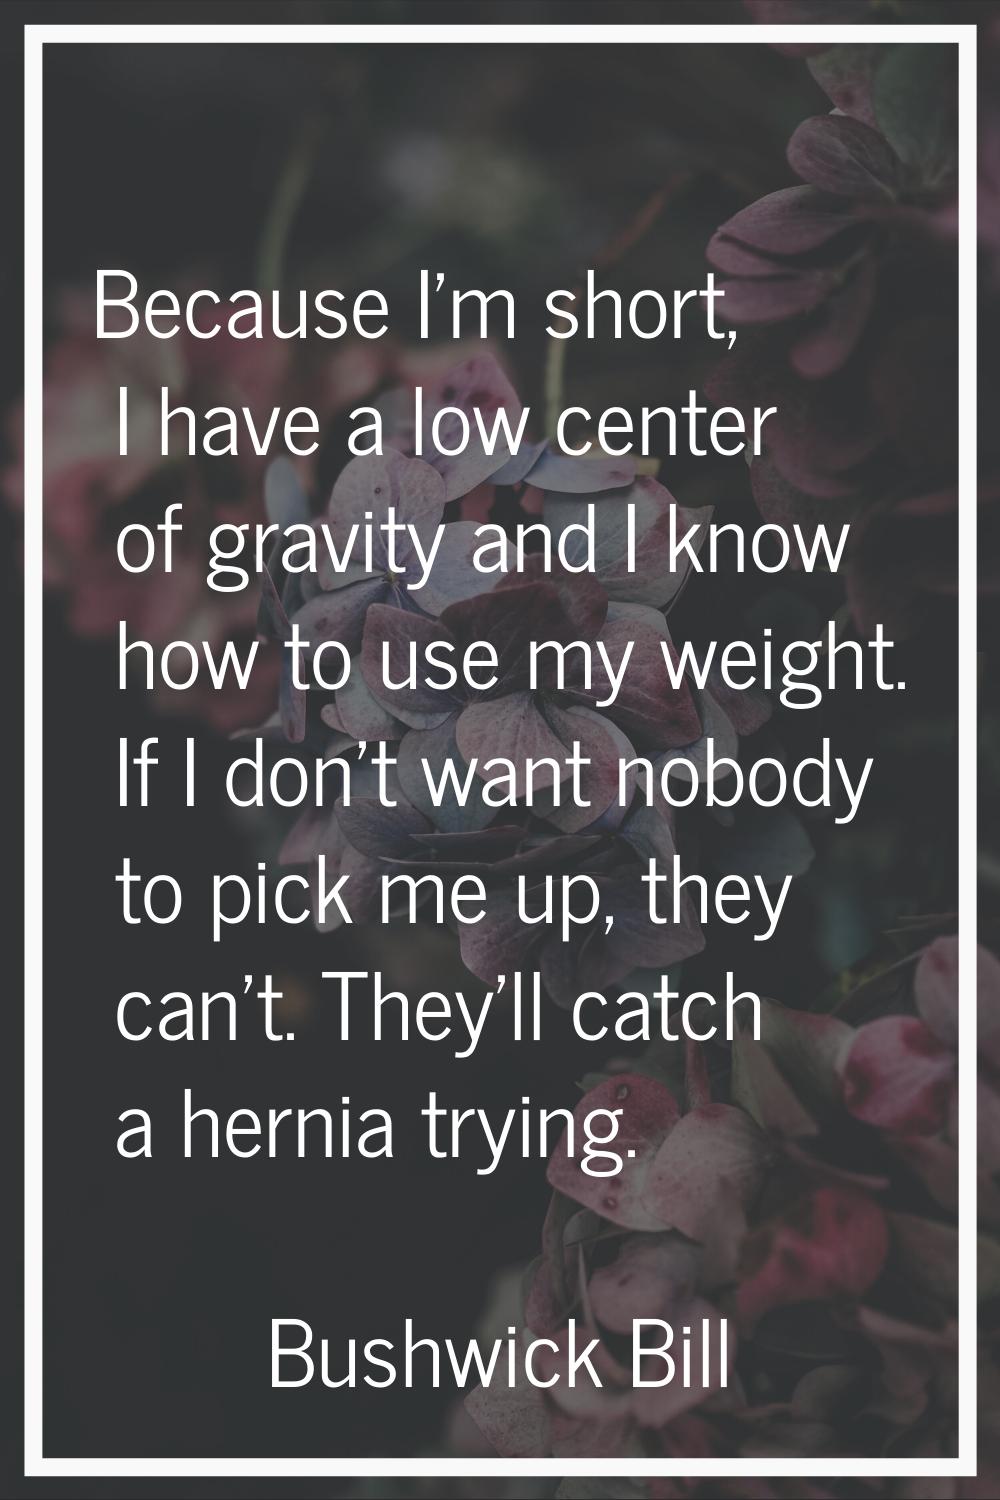 Because I'm short, I have a low center of gravity and I know how to use my weight. If I don't want 